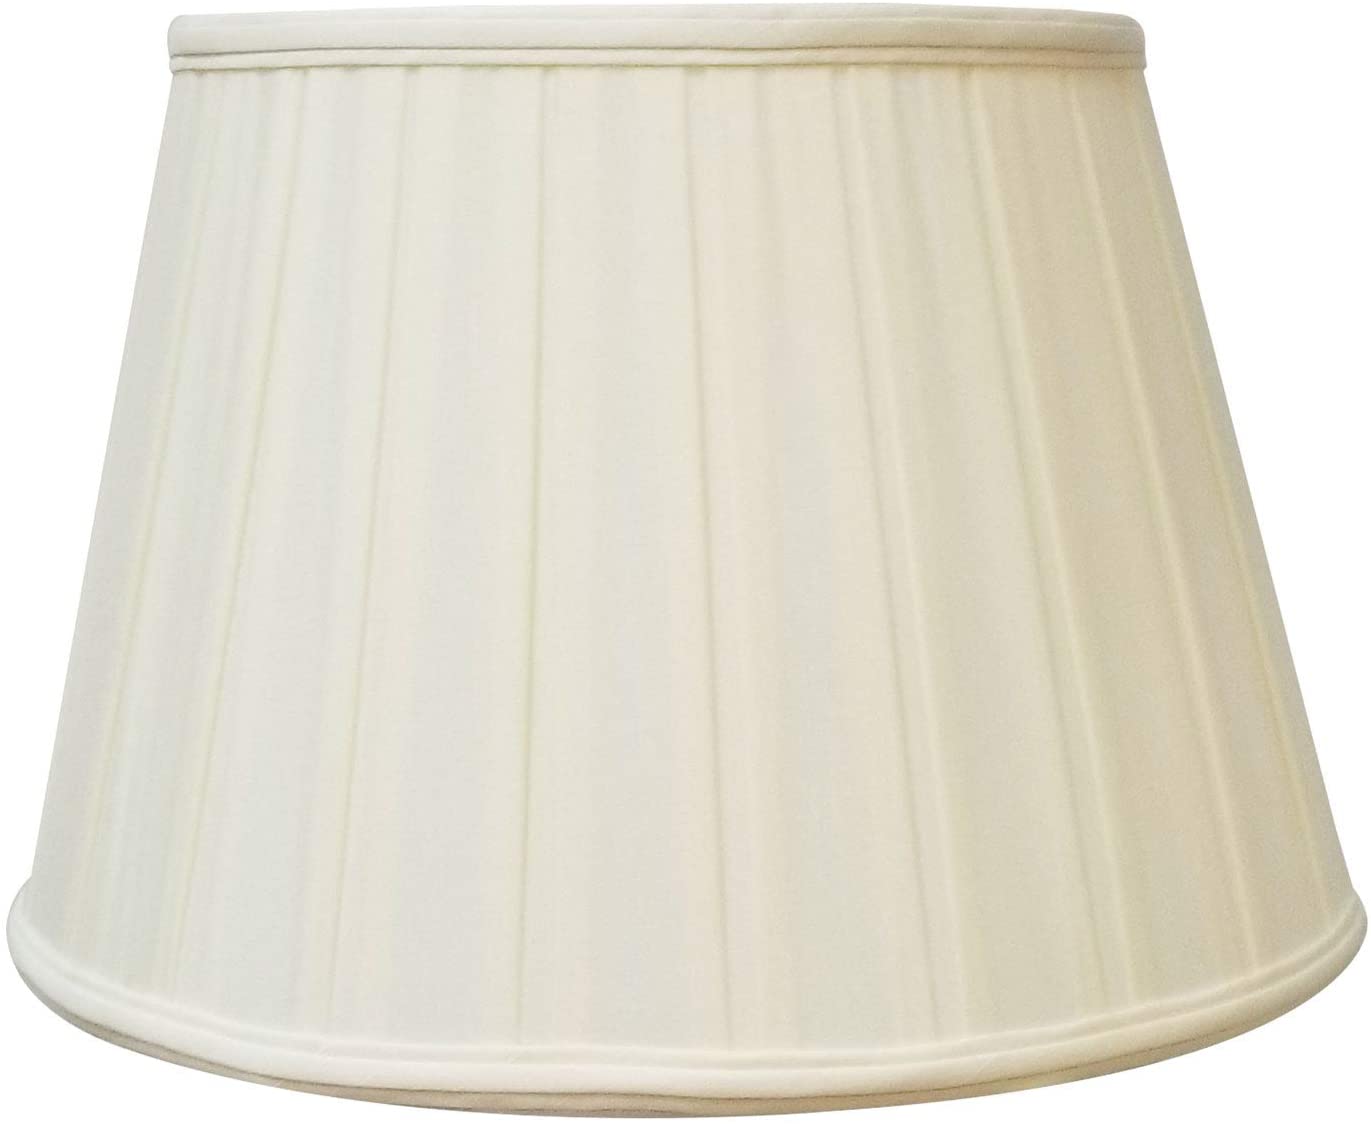 Royal Designs Empire English Pleat Basic Lamp Shade Eggshell 12.5 x 20 x 13.5 5 Lamps Buy - Best Online Lighting Stores